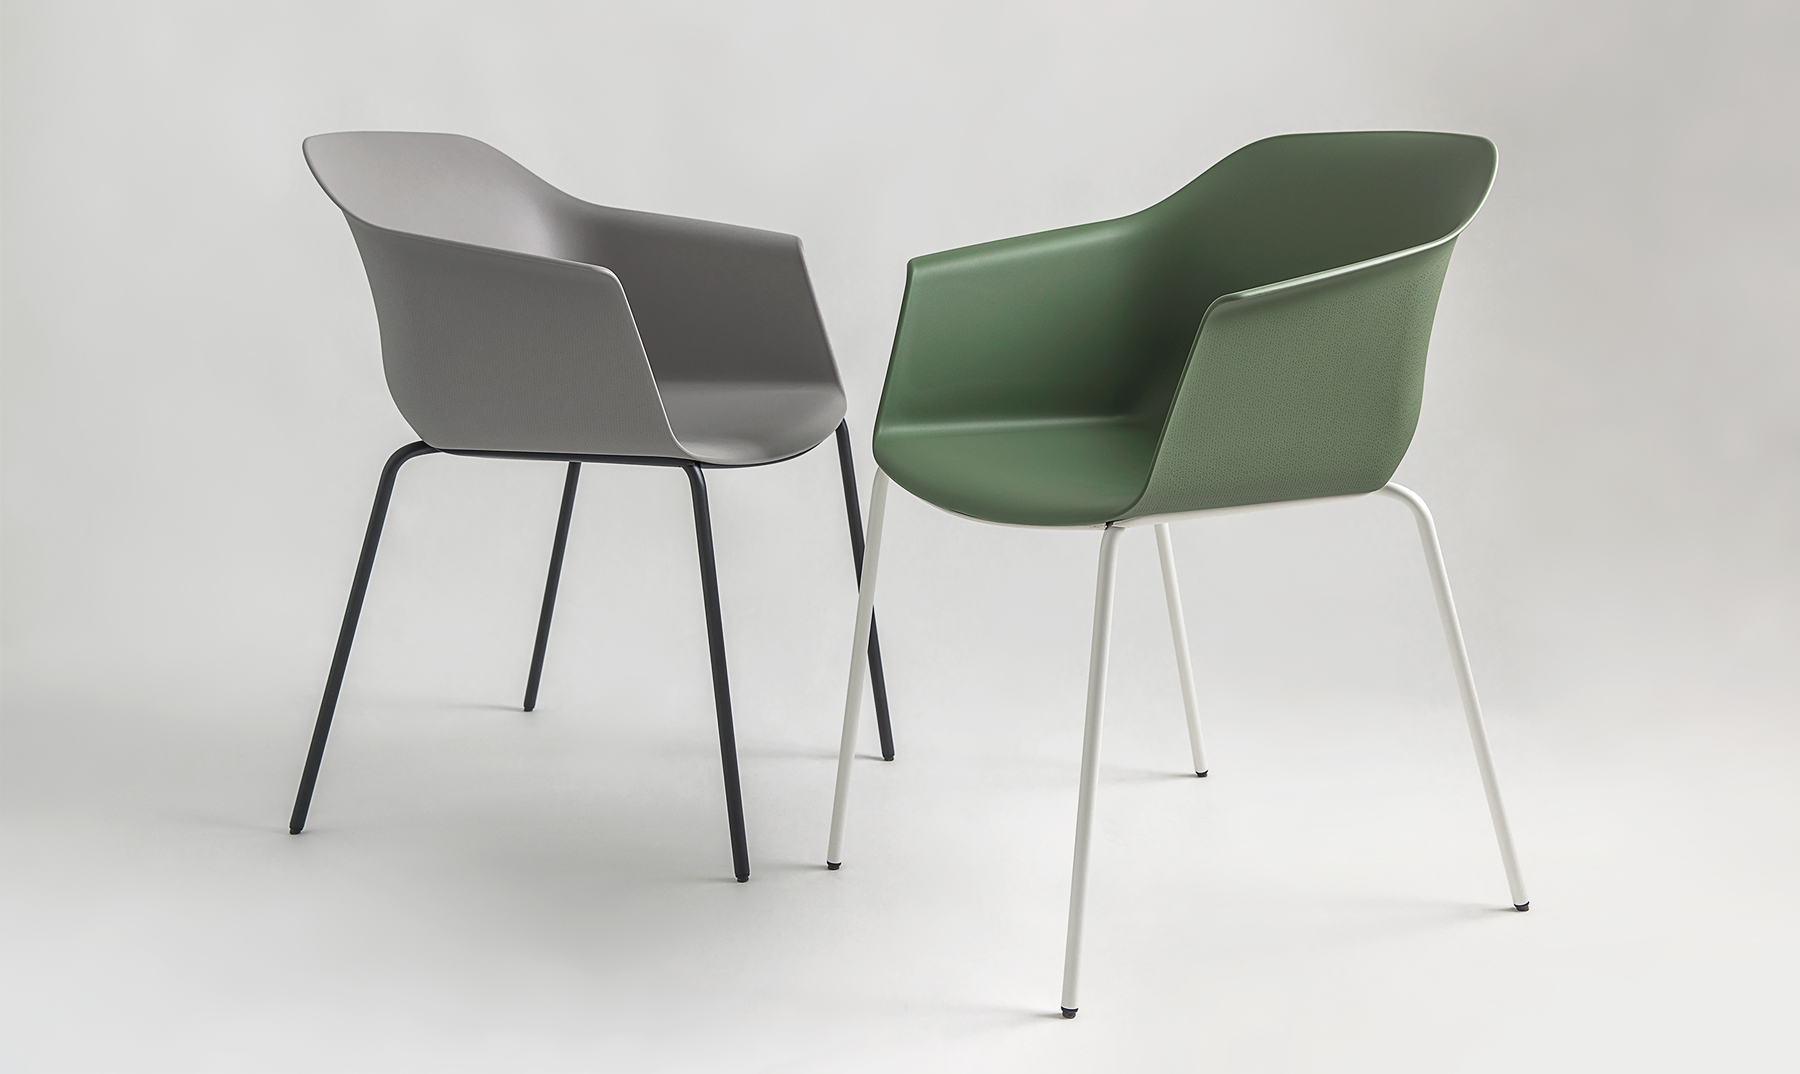 The image shows two modern, minimalist chairs named Noom 60 designed by Alegre Design for Actiu. One chair is light gray with thin, black metal legs, while the other is olive green with thin, white metal legs. Both chairs feature a curved, bucket-style seat with integrated armrests. These sleek and contemporary chairs are suitable for various settings such as offices or homes. Keywords: Noom 60, Actiu, Alegre Design, product designer, modern chairs, minimalist chairs, office furniture, contemporary design.